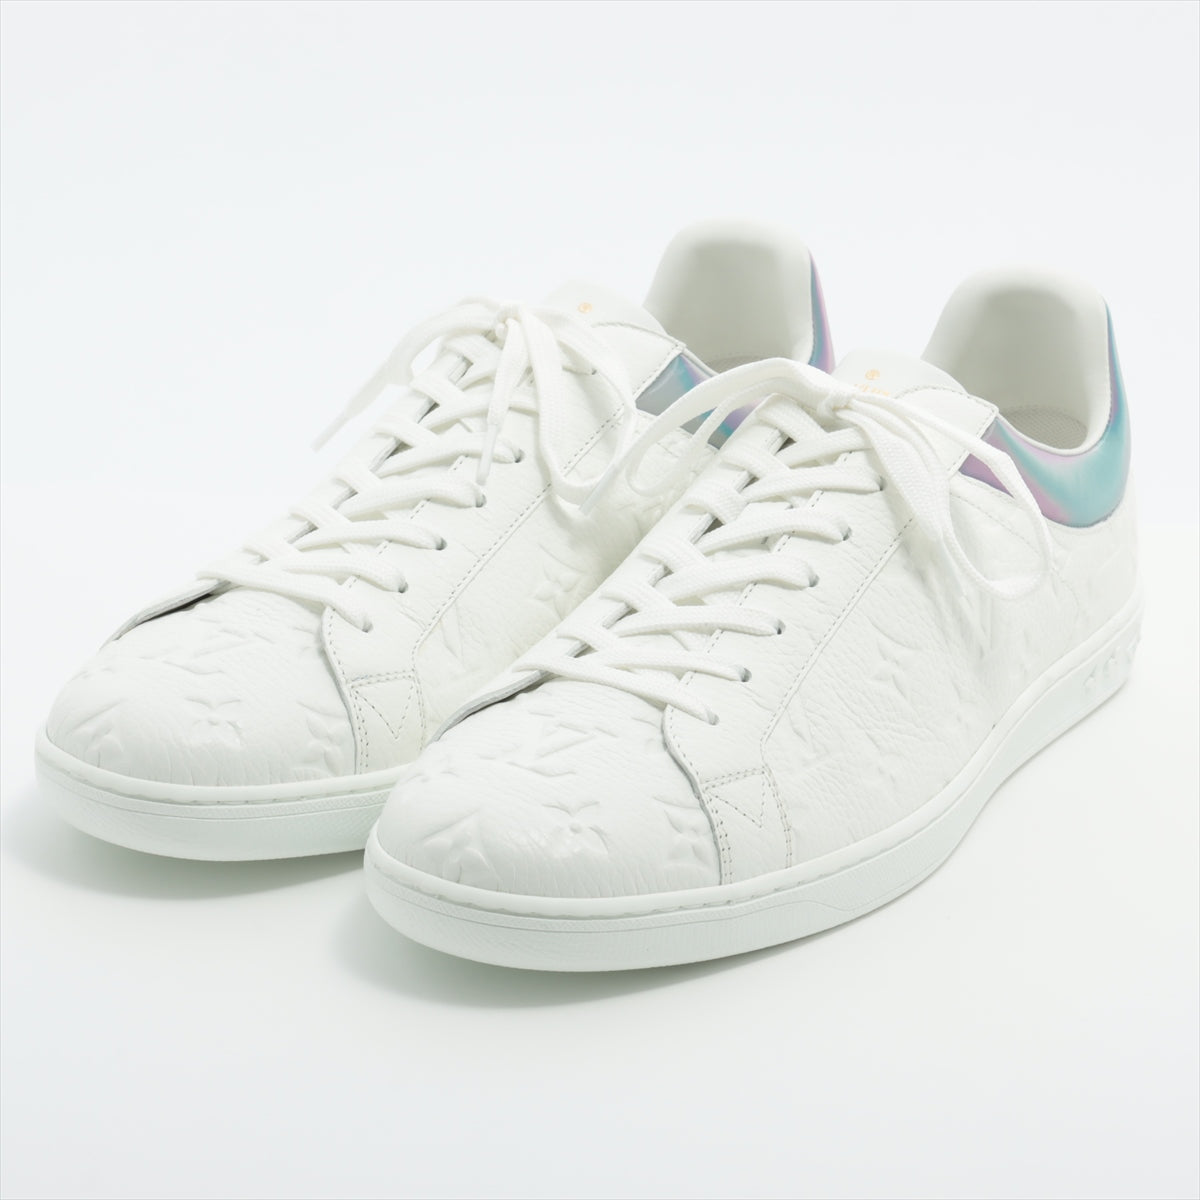 Louis Vuitton Luxembourg Line 20 years Leather Sneakers 10 Men's White MS0250 Monogram